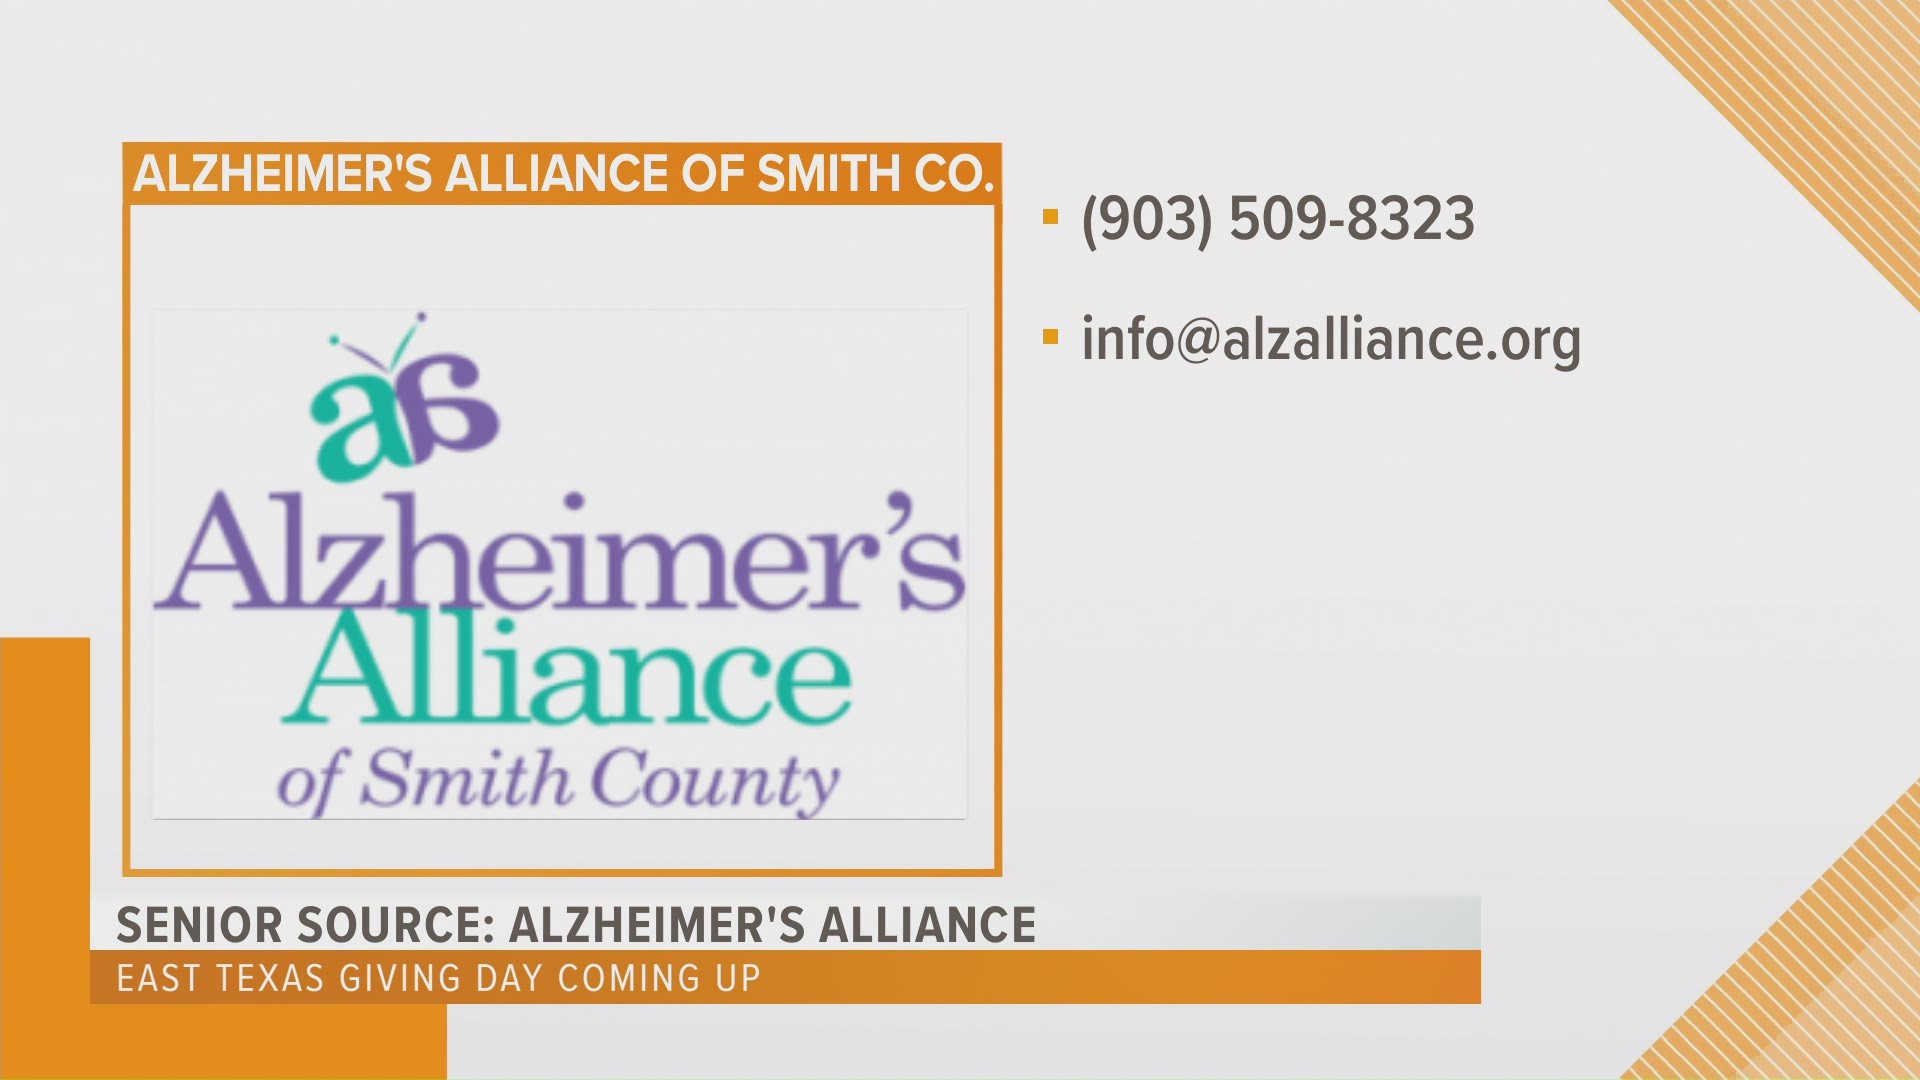 The pandemic has taken a toll on nonprofits and the clients they serve like those living with Alzheimer's and dementia. April 27th you can make a difference locally.